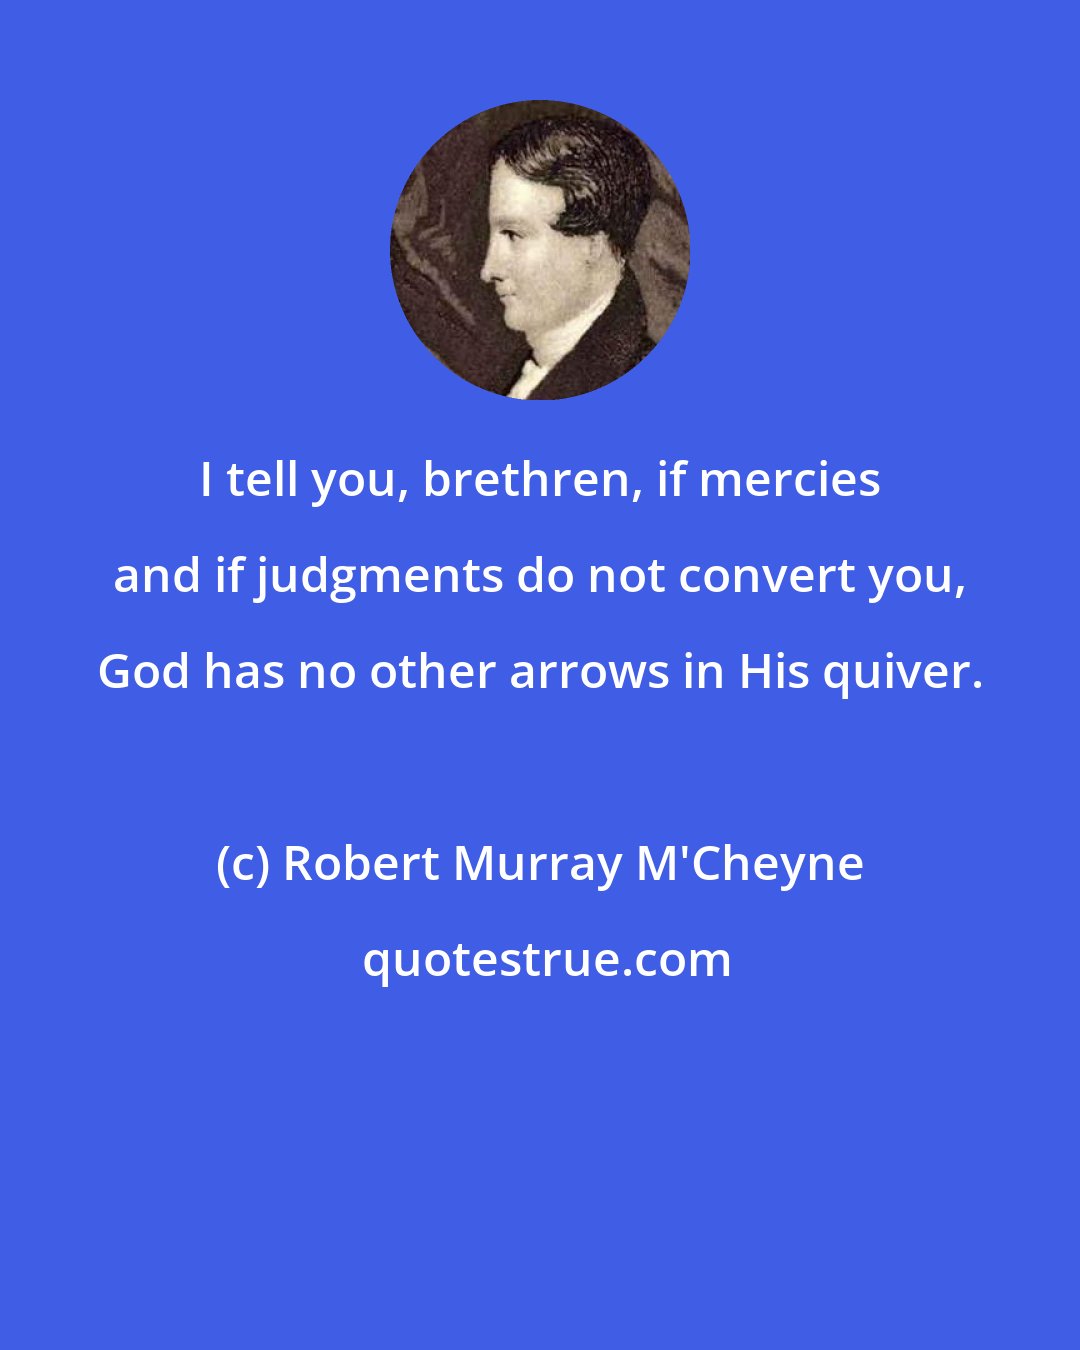 Robert Murray M'Cheyne: I tell you, brethren, if mercies and if judgments do not convert you, God has no other arrows in His quiver.